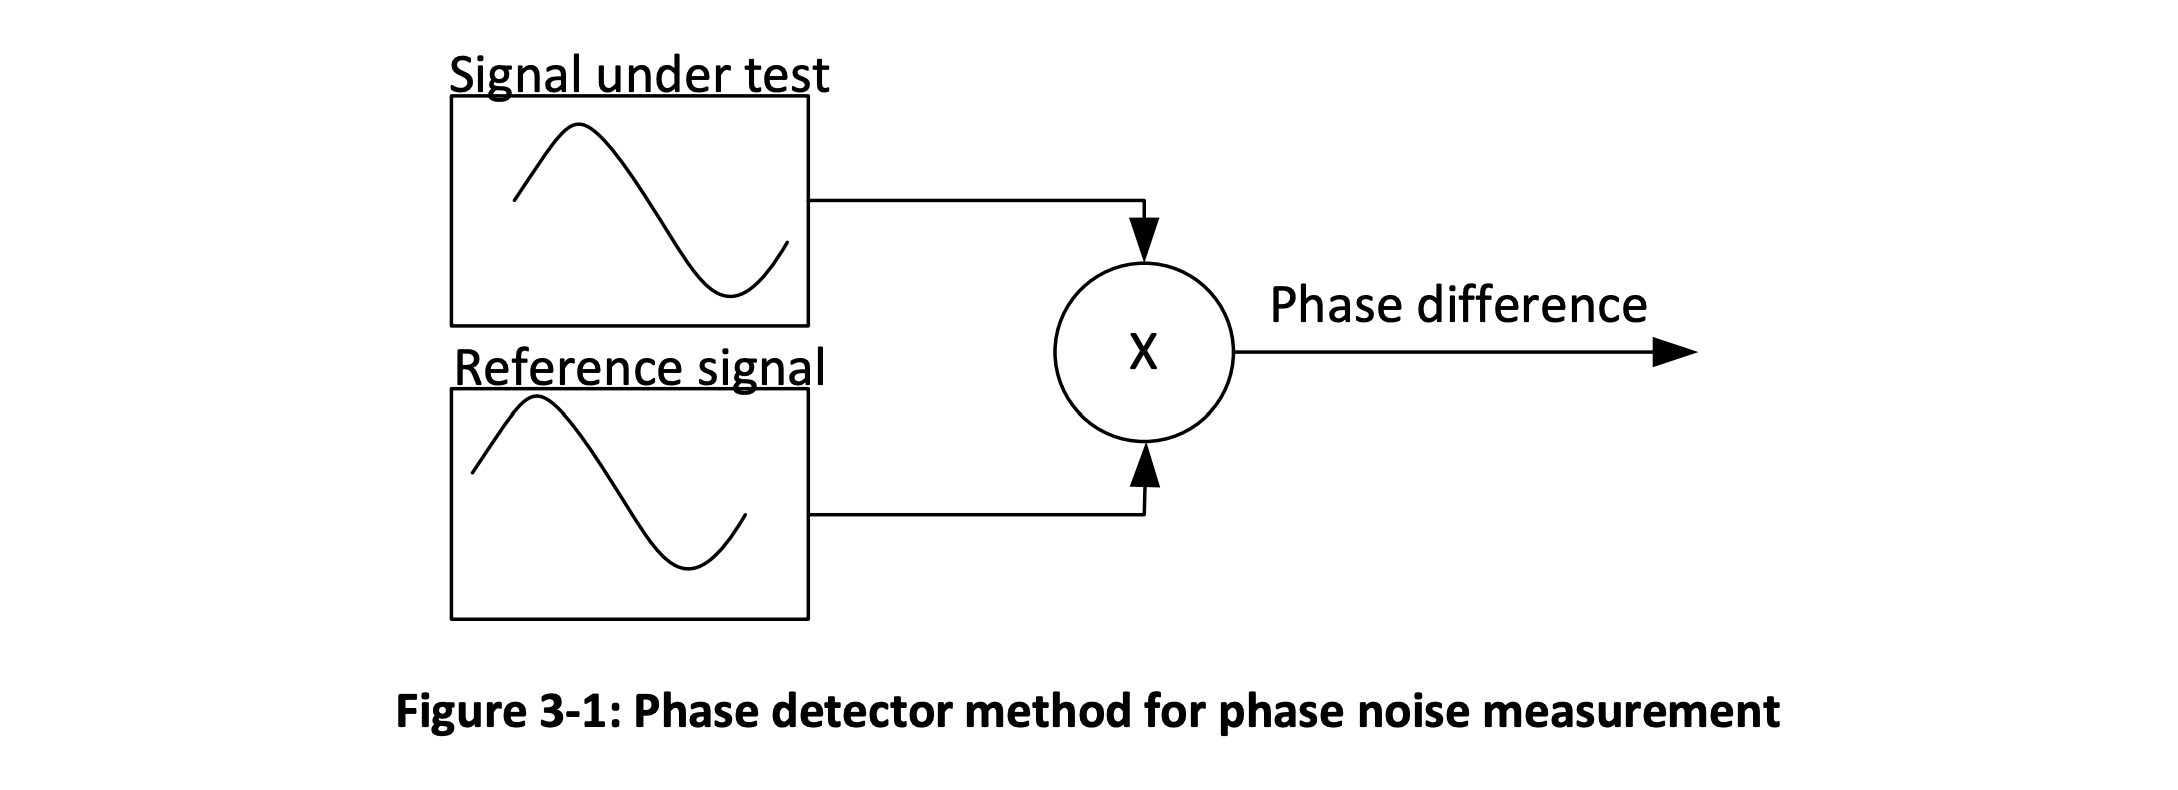 Figure 3-1: Phase Detector Method for Phase Noise Measurement